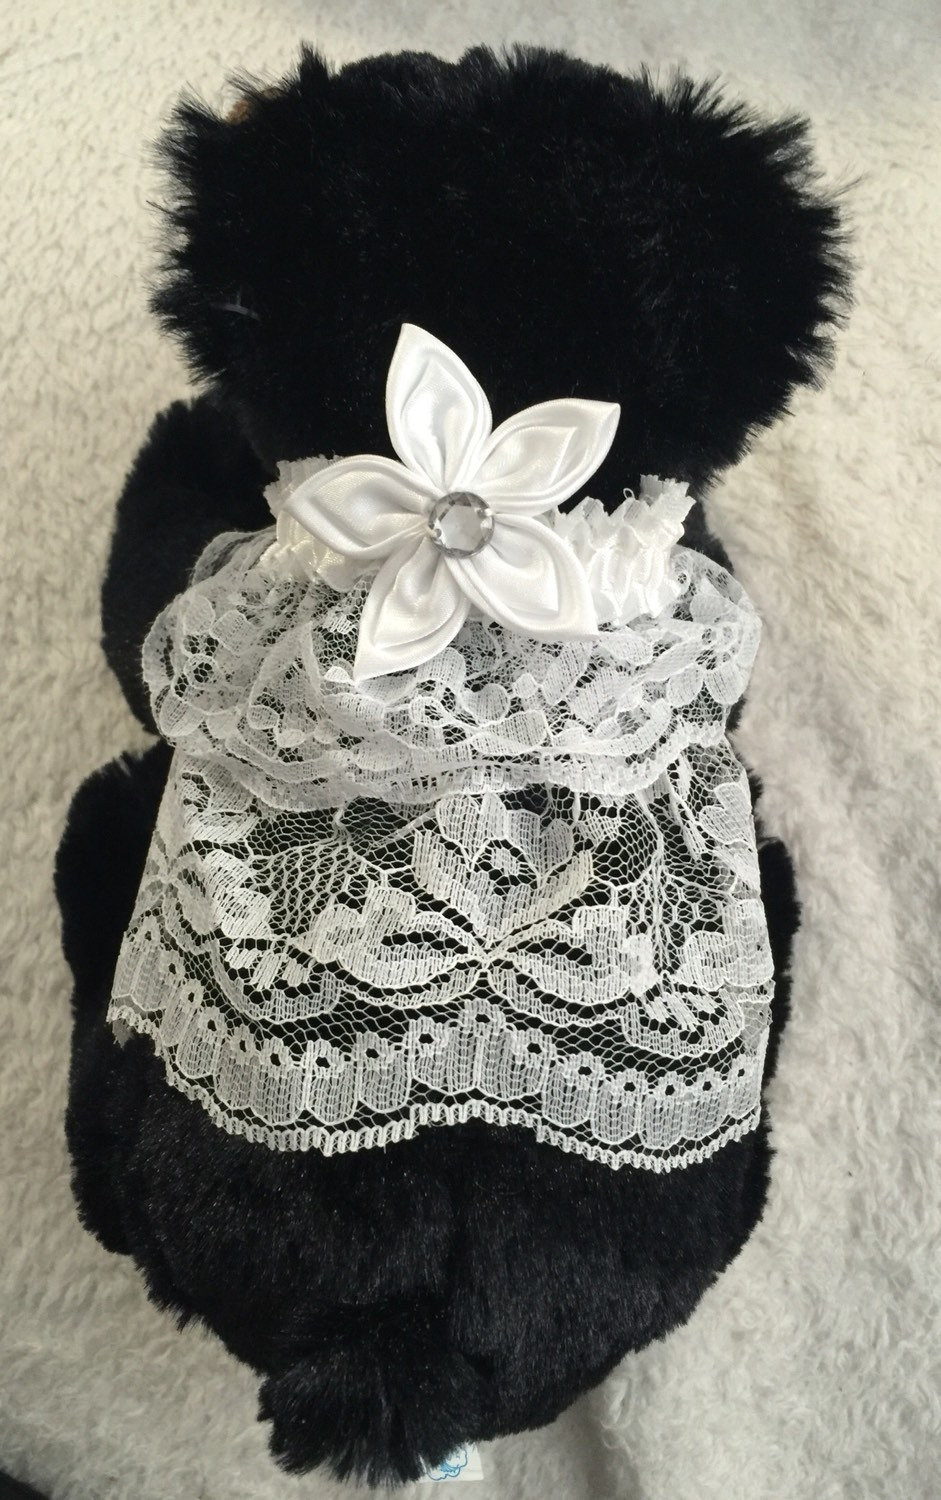 Primary image for Wedding Veil Type Collar for Small or Toy Dogs Hand Crafted to Order